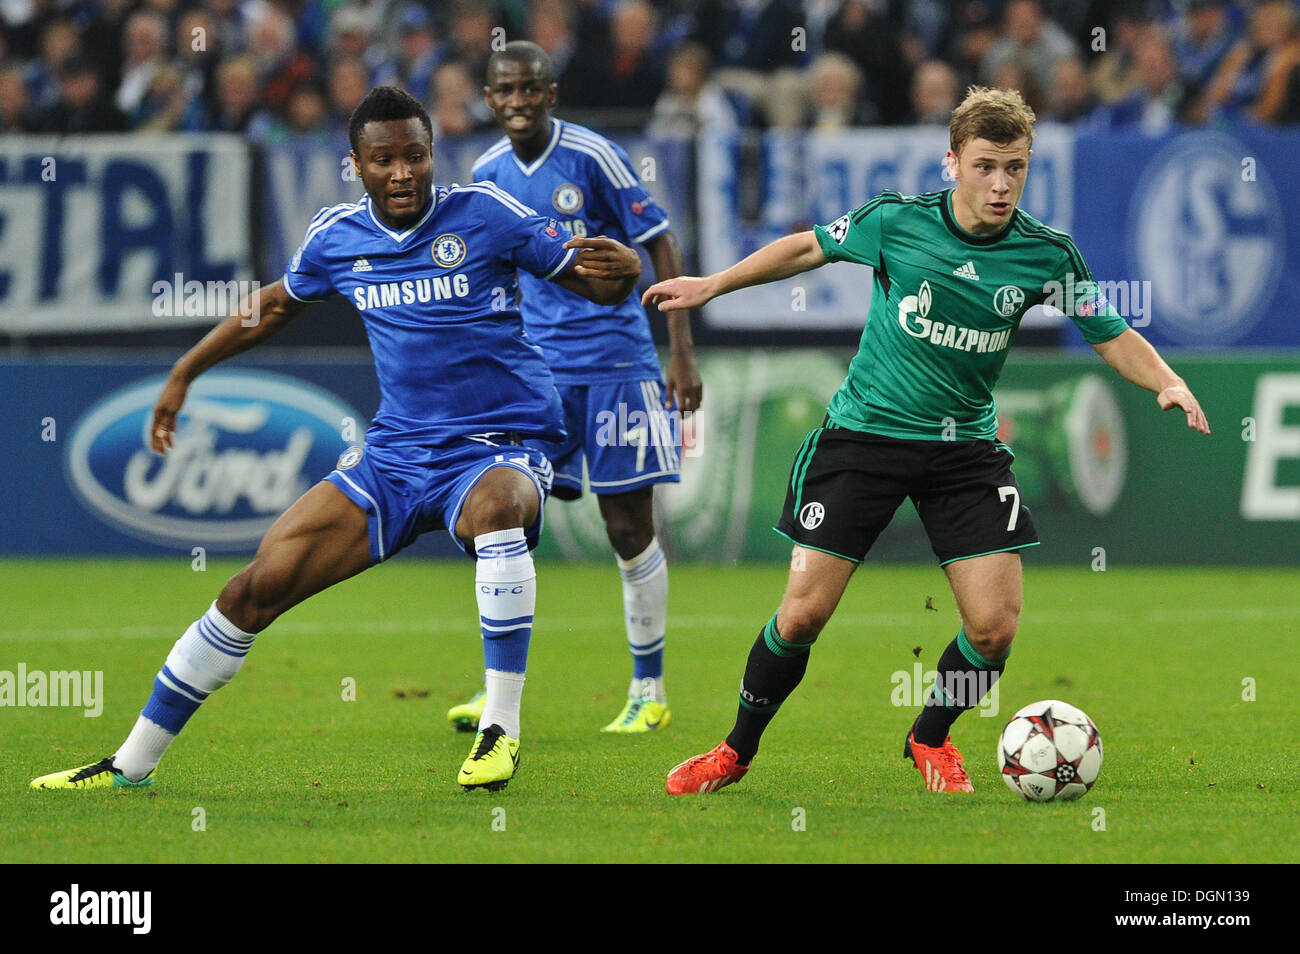 Gelsenkirchen, Germany. 22nd Oct, 2013. Schalke's Max Meyer (R) vies for the ball with Chelsea's John Obi Mikel during the Champions League group E soccer match between FC Schalke 04 and FC Chelsea London at the Gelsenkirchen stadium in Gelsenkirchen, Germany, 22 October 2013. Photo: Frederic Scheidemann/dpa/Alamy Live News Stock Photo